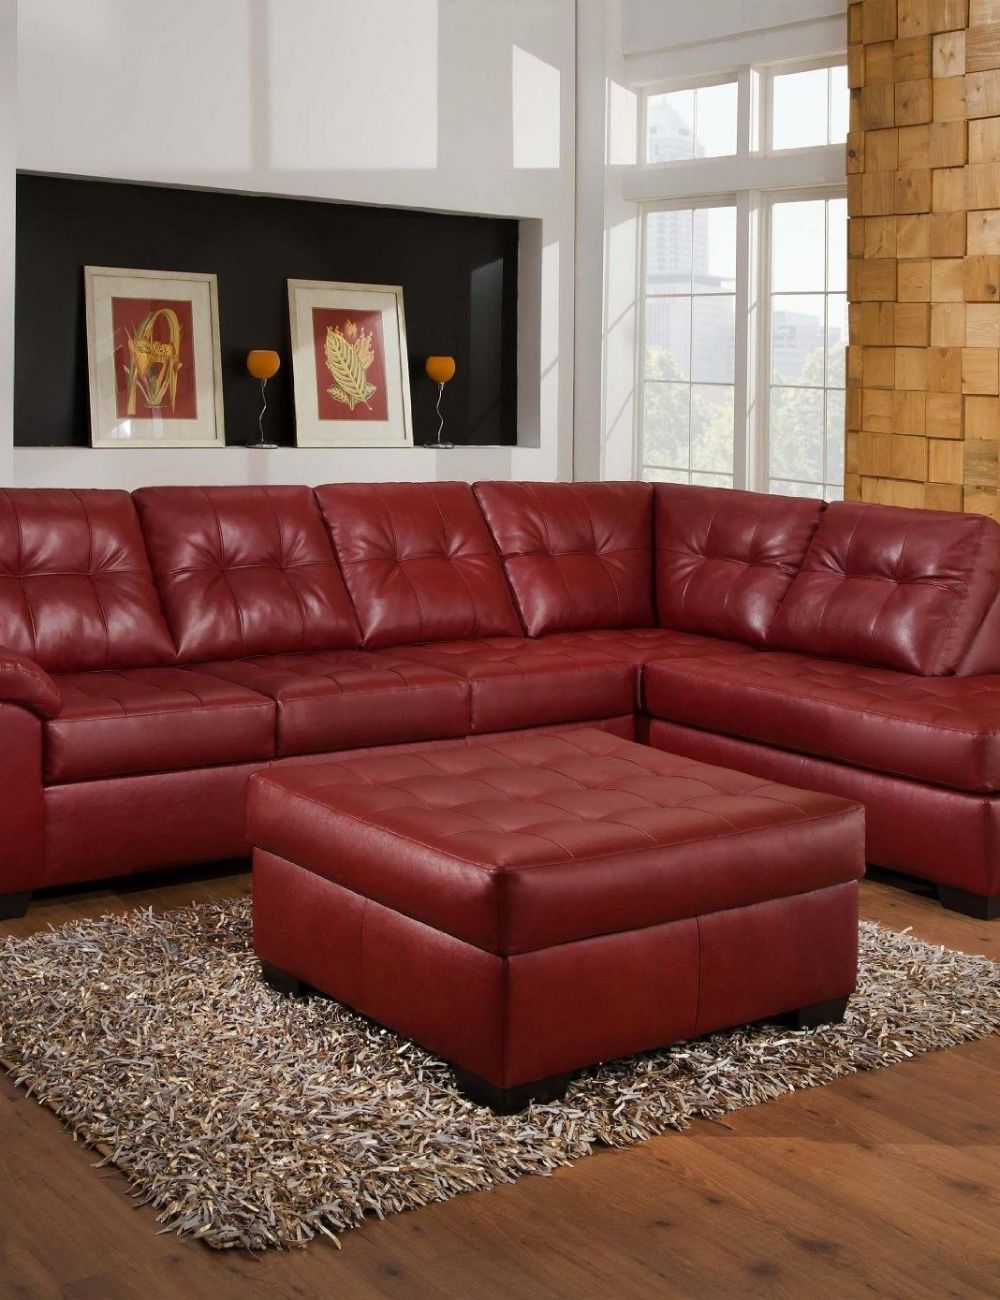 Red leather sectional sofa with ottoman